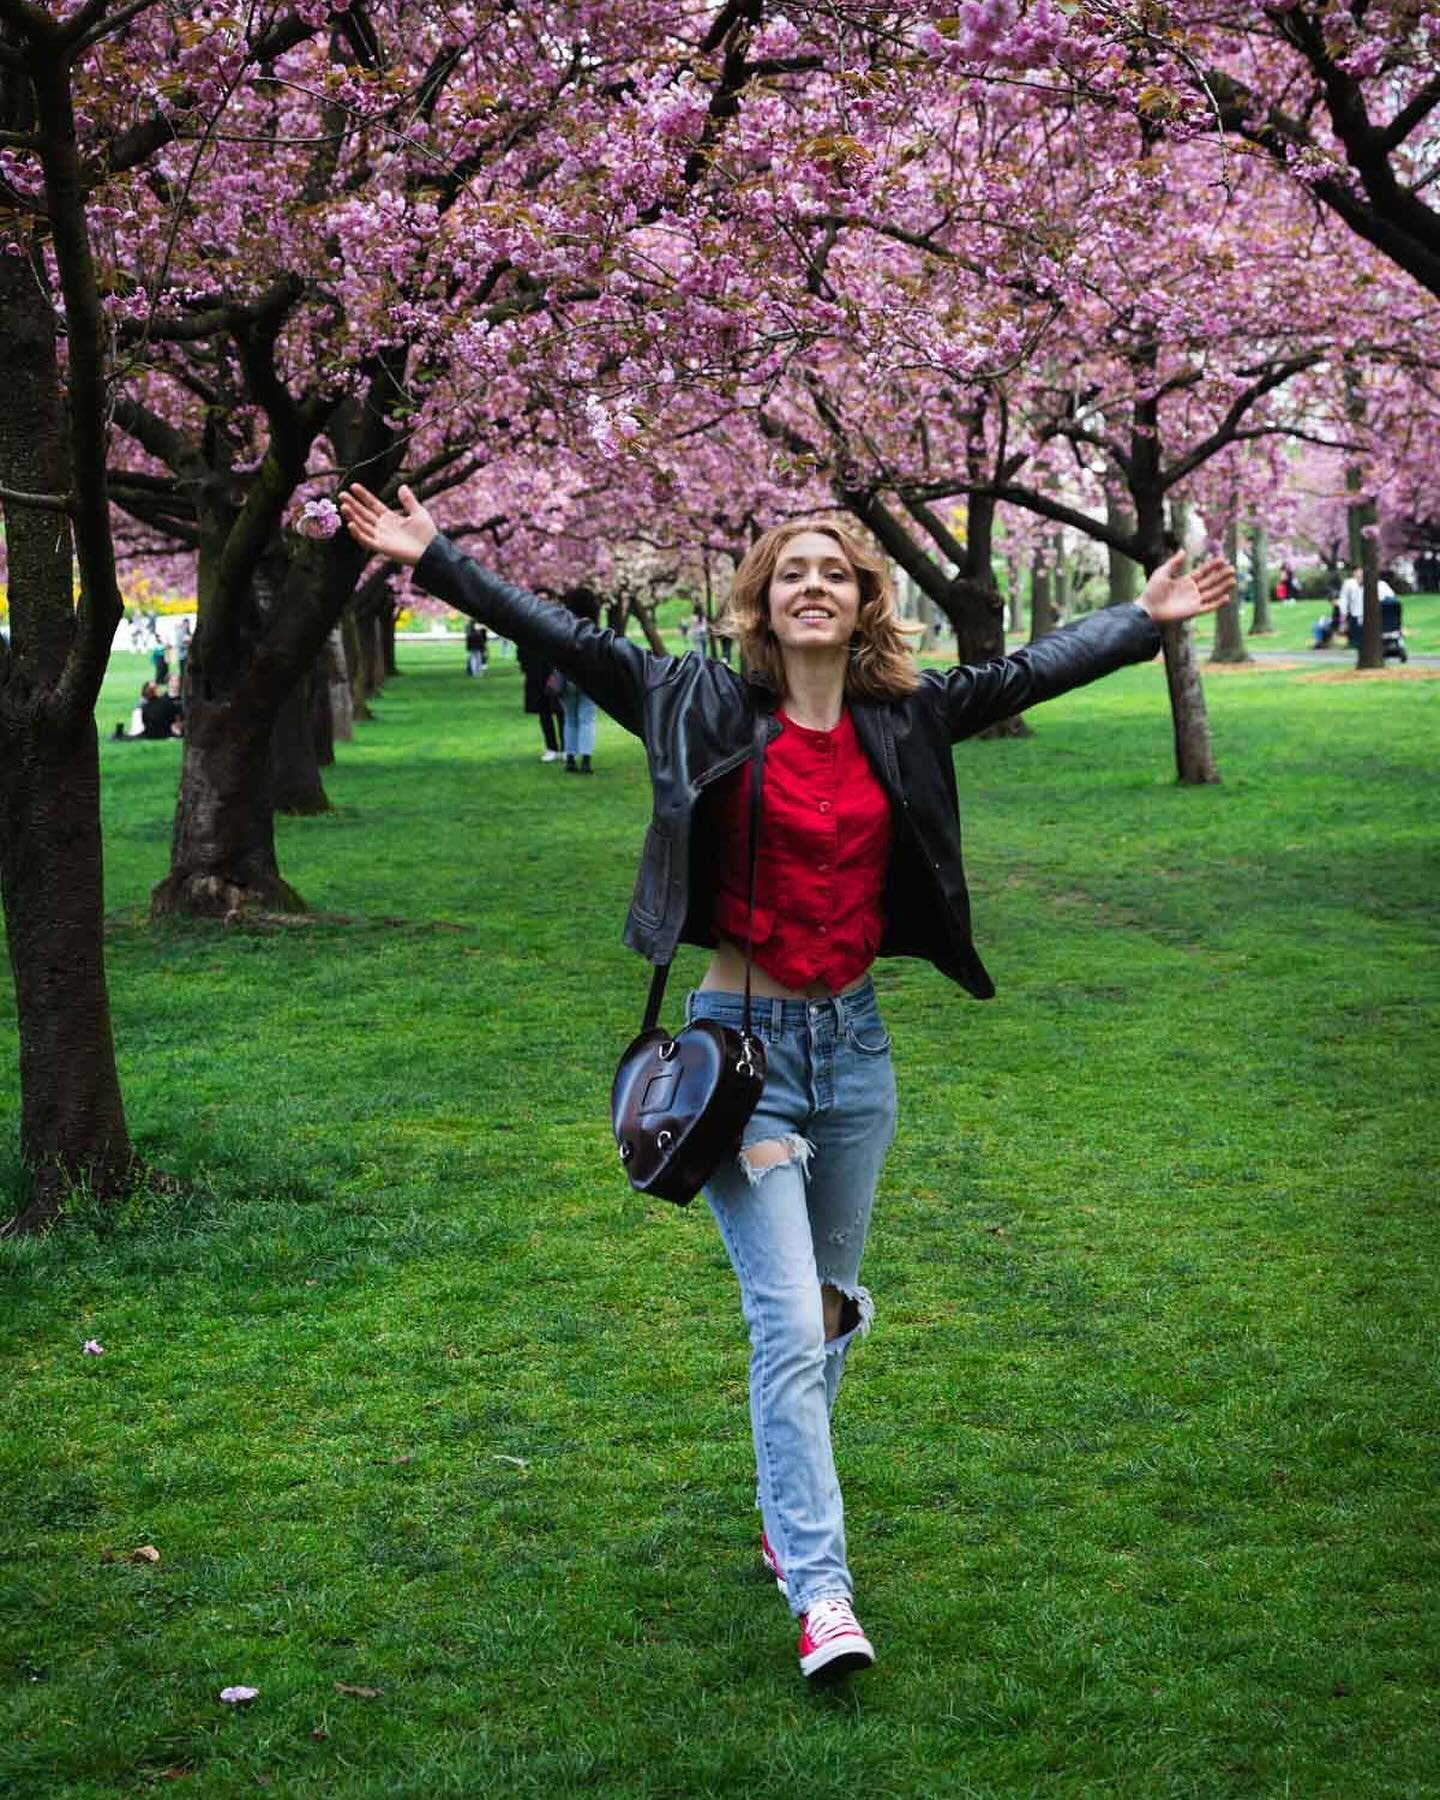 Sending you a giant hug and a few spring blossoms to brighten your Monday! 🌸 SWIPE AND SNIFF!

Leg 2 of the &ldquo;Sister Tour&rdquo; is complete and I&rsquo;m currently on a bus heading for Baltimore to visit my oldest daughter, Ashley. 

🌷Janelle